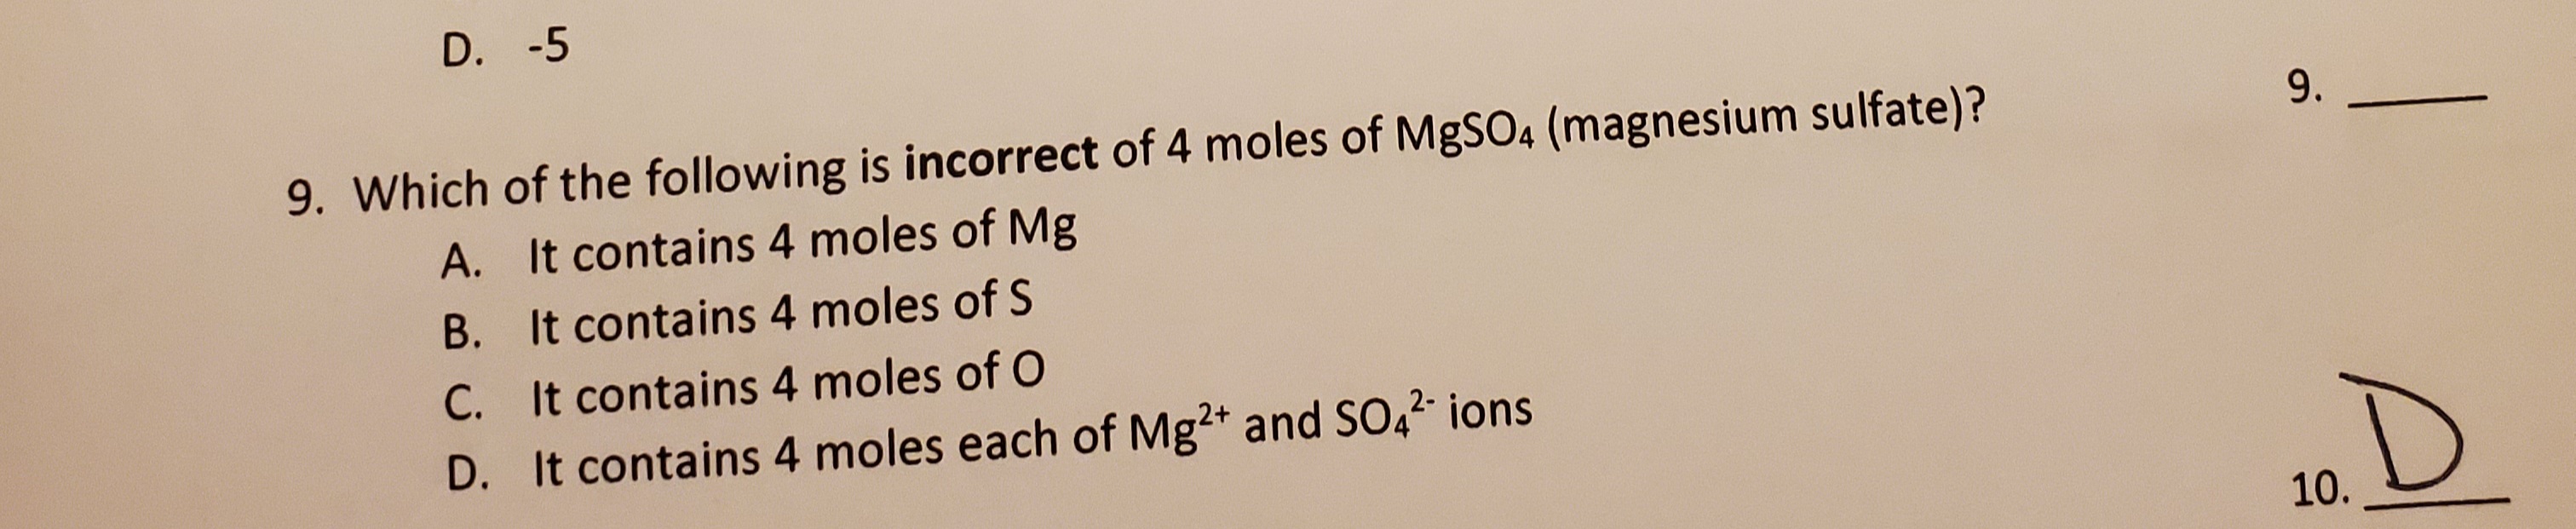 D. -5
Which of the following is incorrect of 4 moles of MgSO4 (magnesium sulfate)?
A. It contains 4 moles of Mg
B. It contains 4 moles of S
C. It contains 4 moles of O
D. It contains 4 moles each of Mg2+ and SO4²- ions
